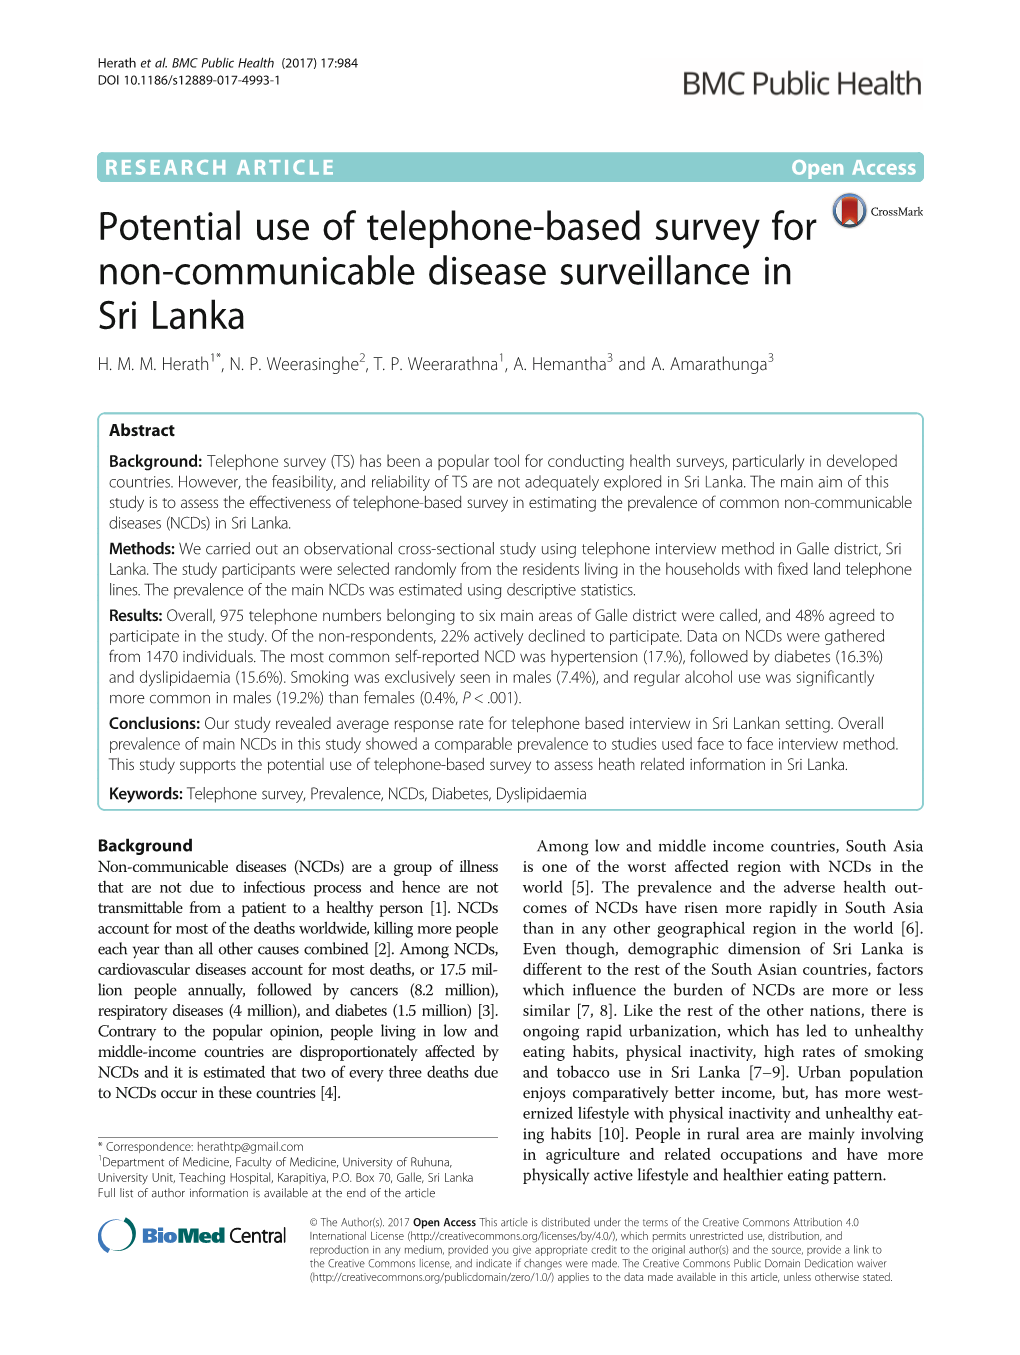 Potential Use of Telephone-Based Survey for Non-Communicable Disease Surveillance in Sri Lanka H